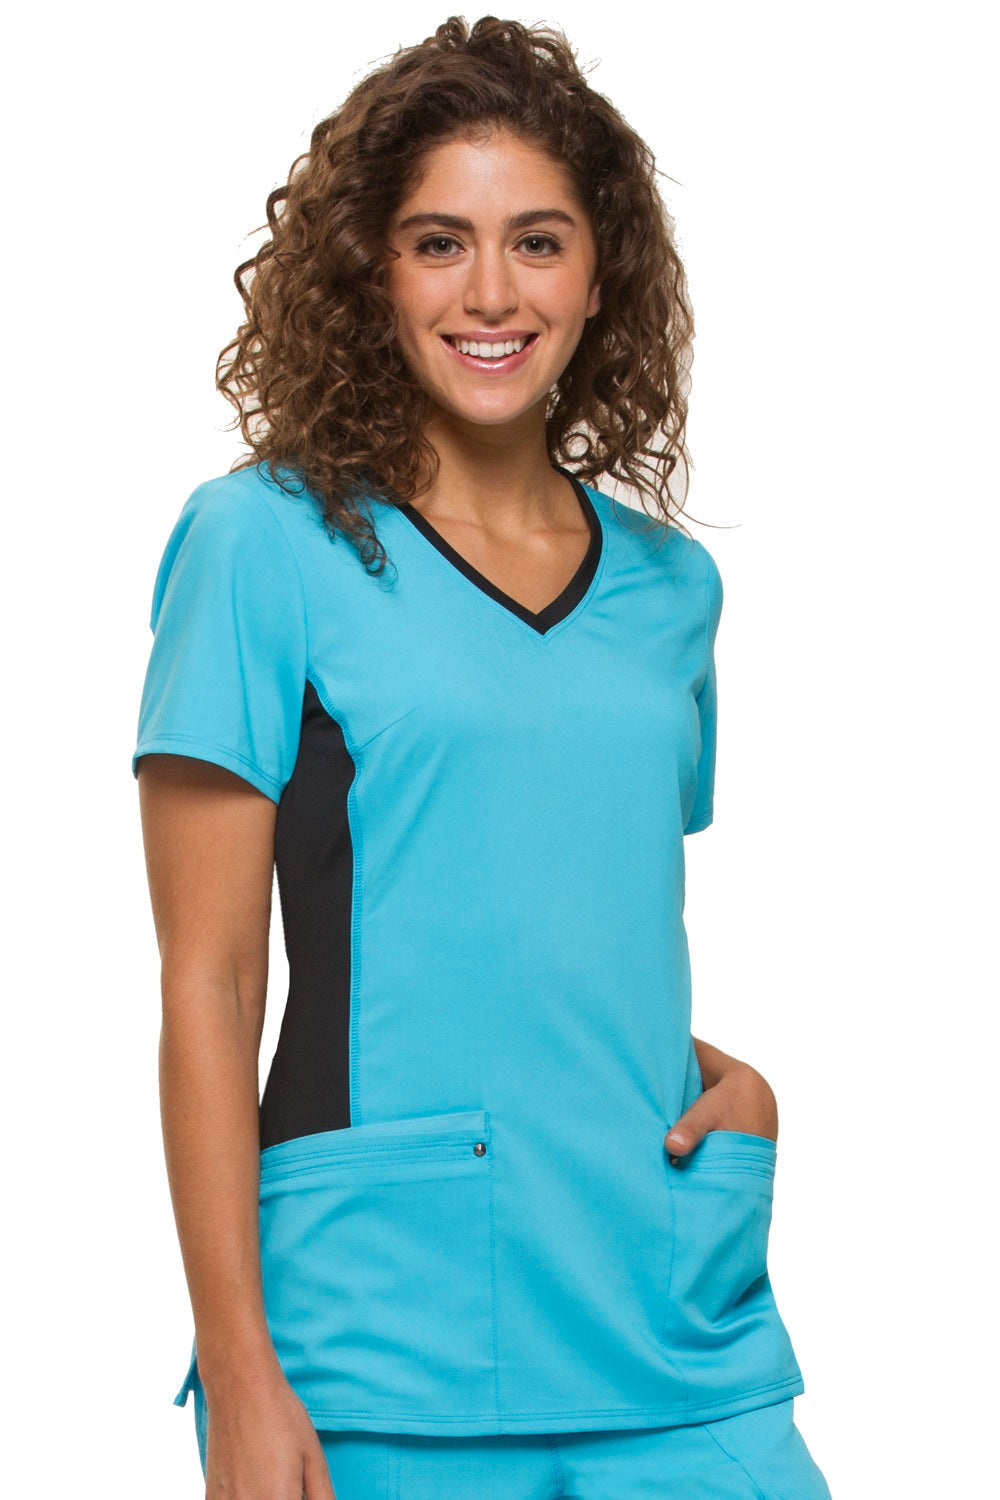 Healing Hands Plus Size Scrub Top Purple Label Juliet in Turquoise with Black panel at Parker's Clothing and Shoes.